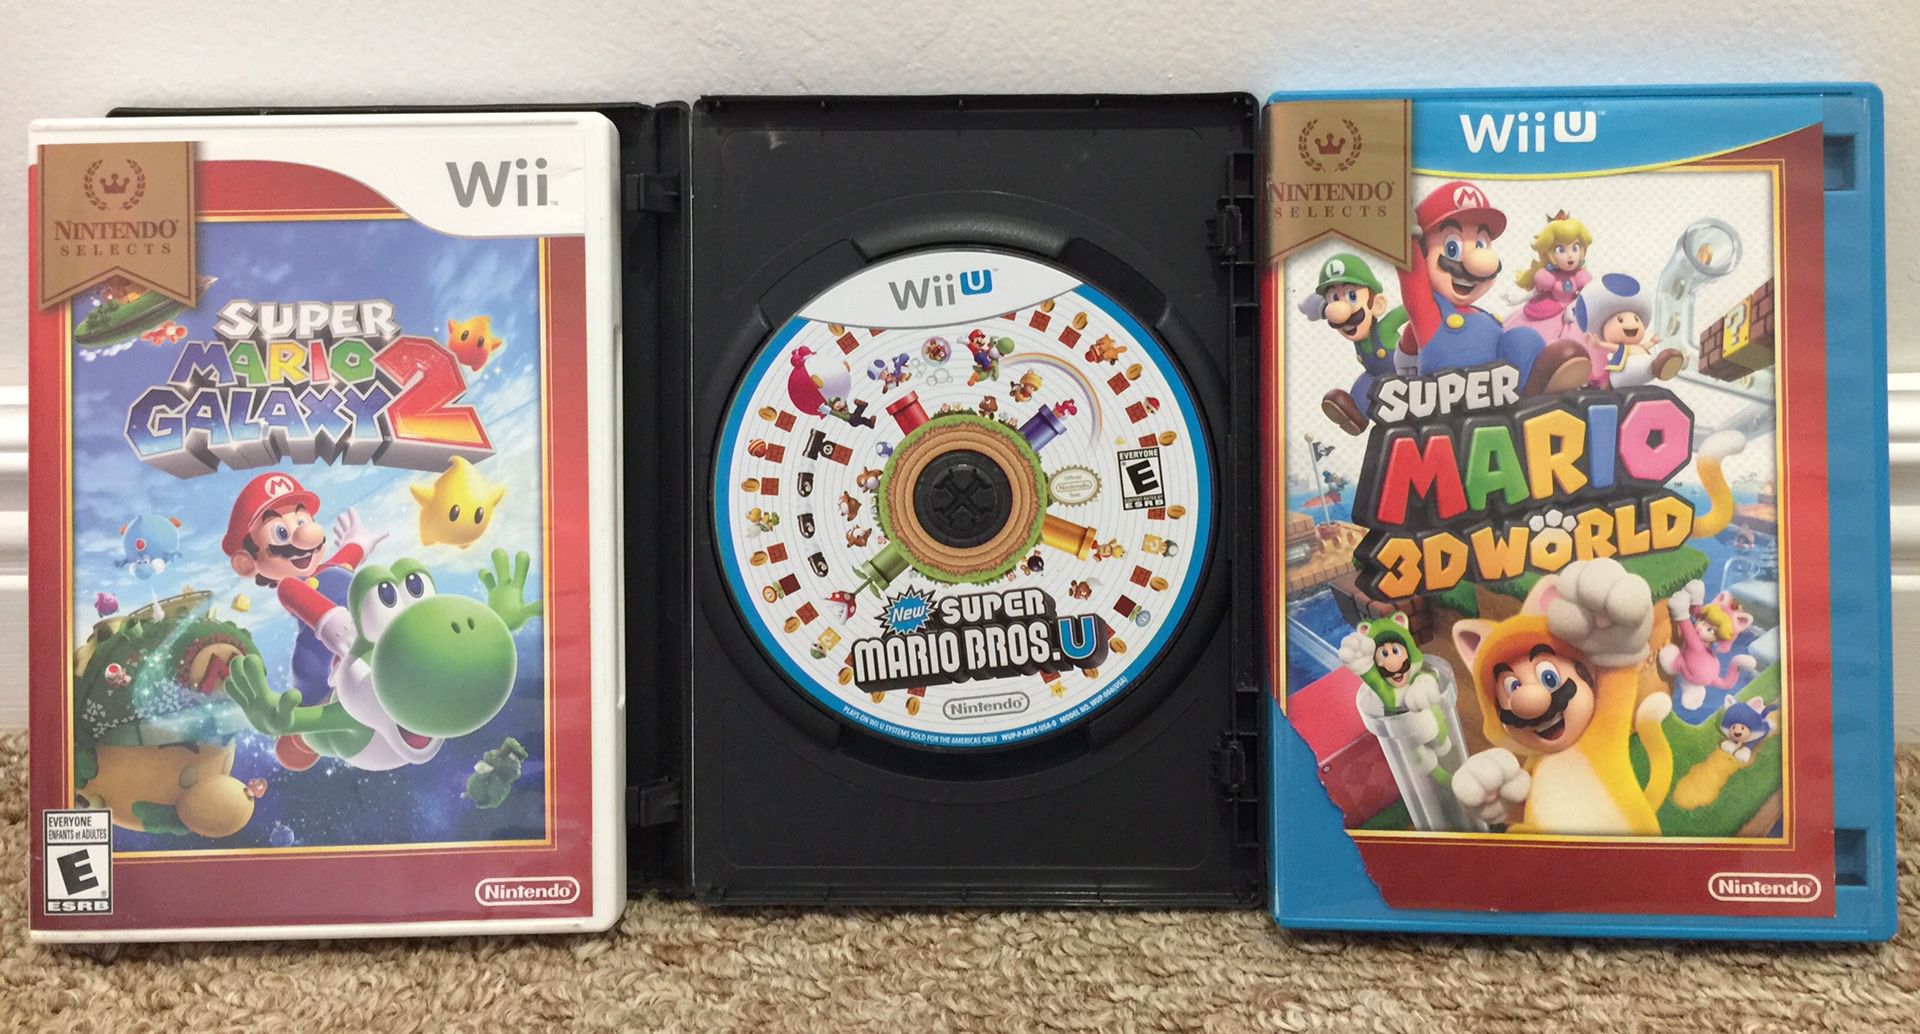 Super Mario Bros. Wii U Game Bundle For Sale *$45 For Everything*